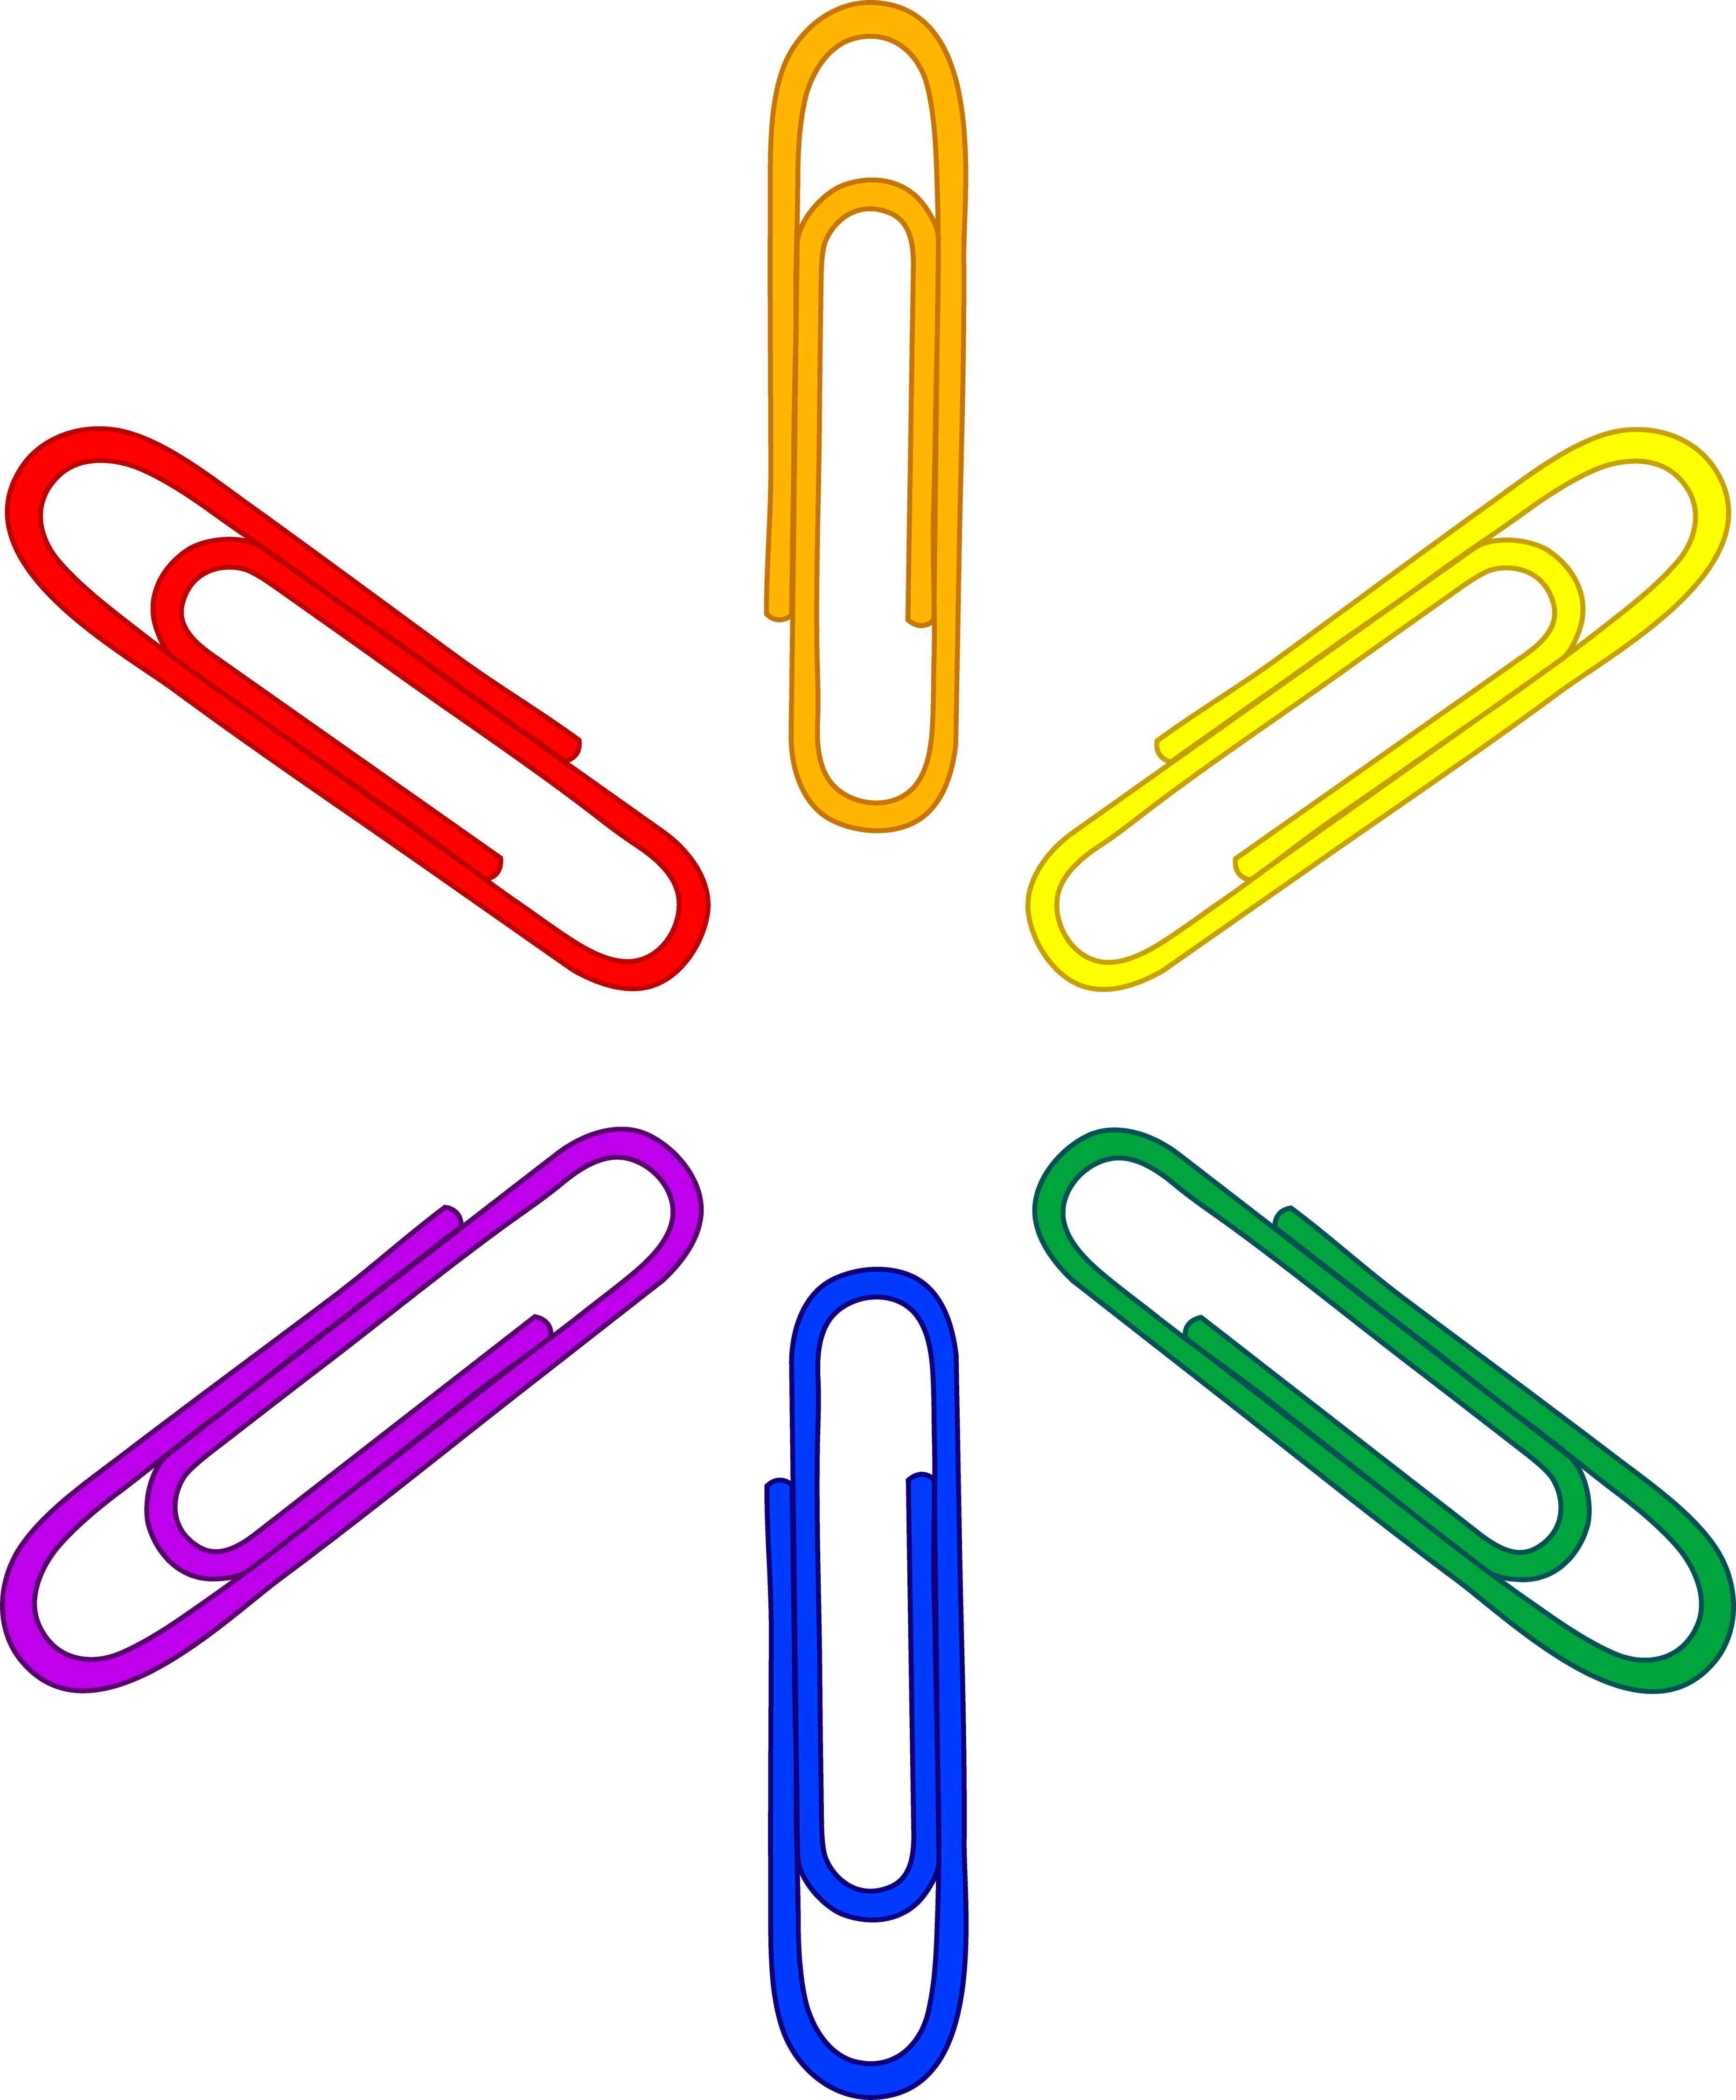 Rainbow clip pattern free. Working clipart paper works